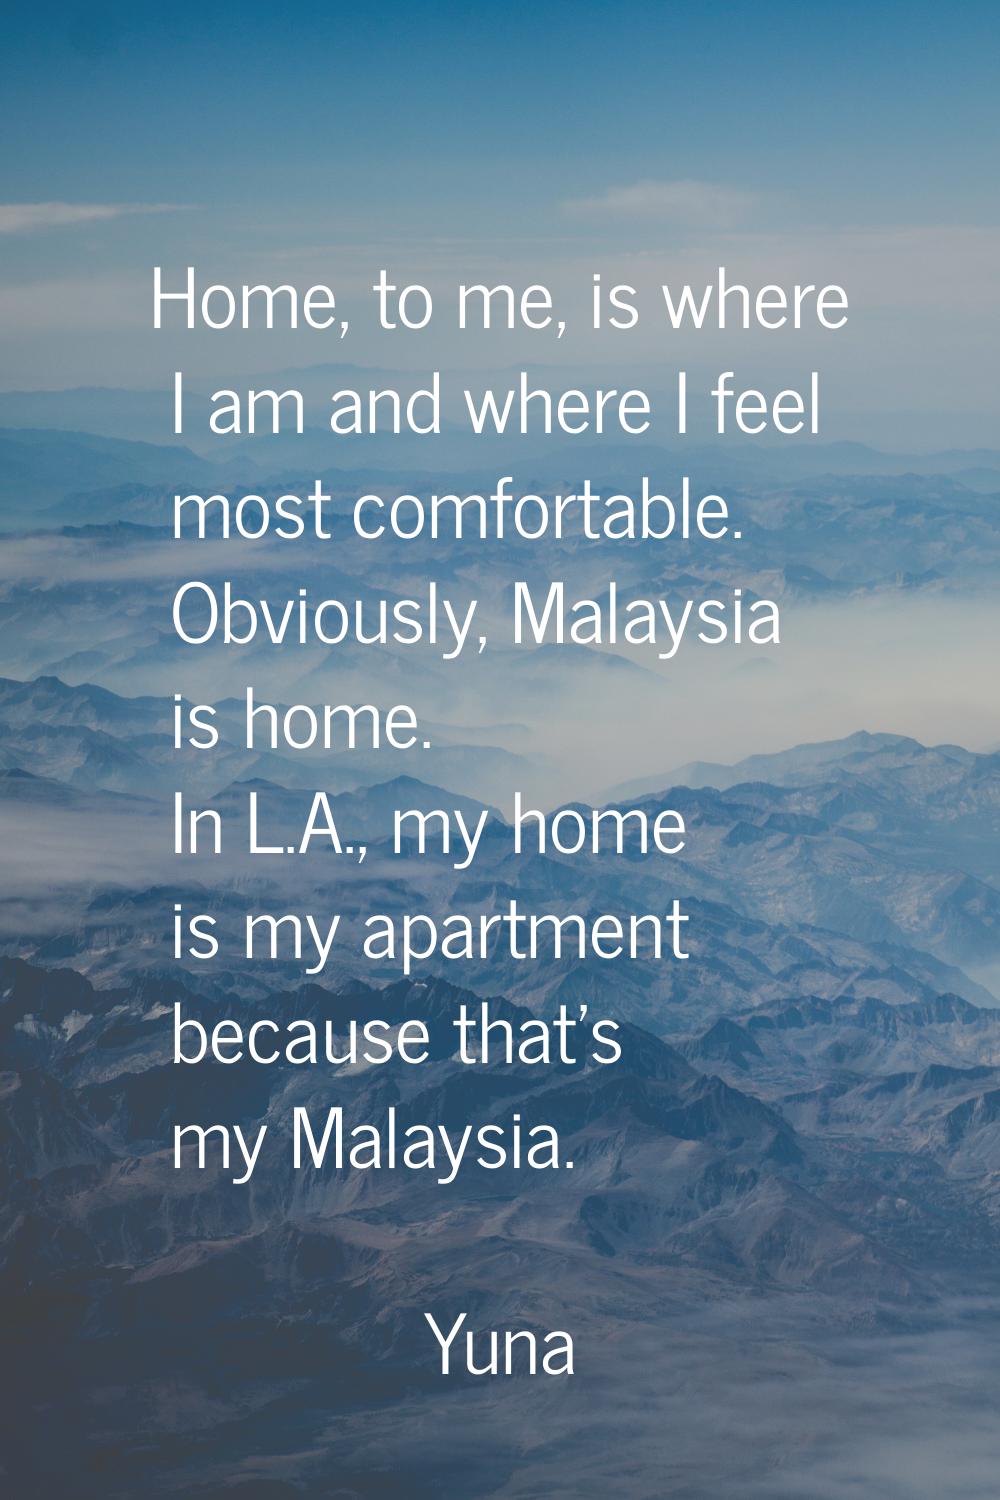 Home, to me, is where I am and where I feel most comfortable. Obviously, Malaysia is home. In L.A.,